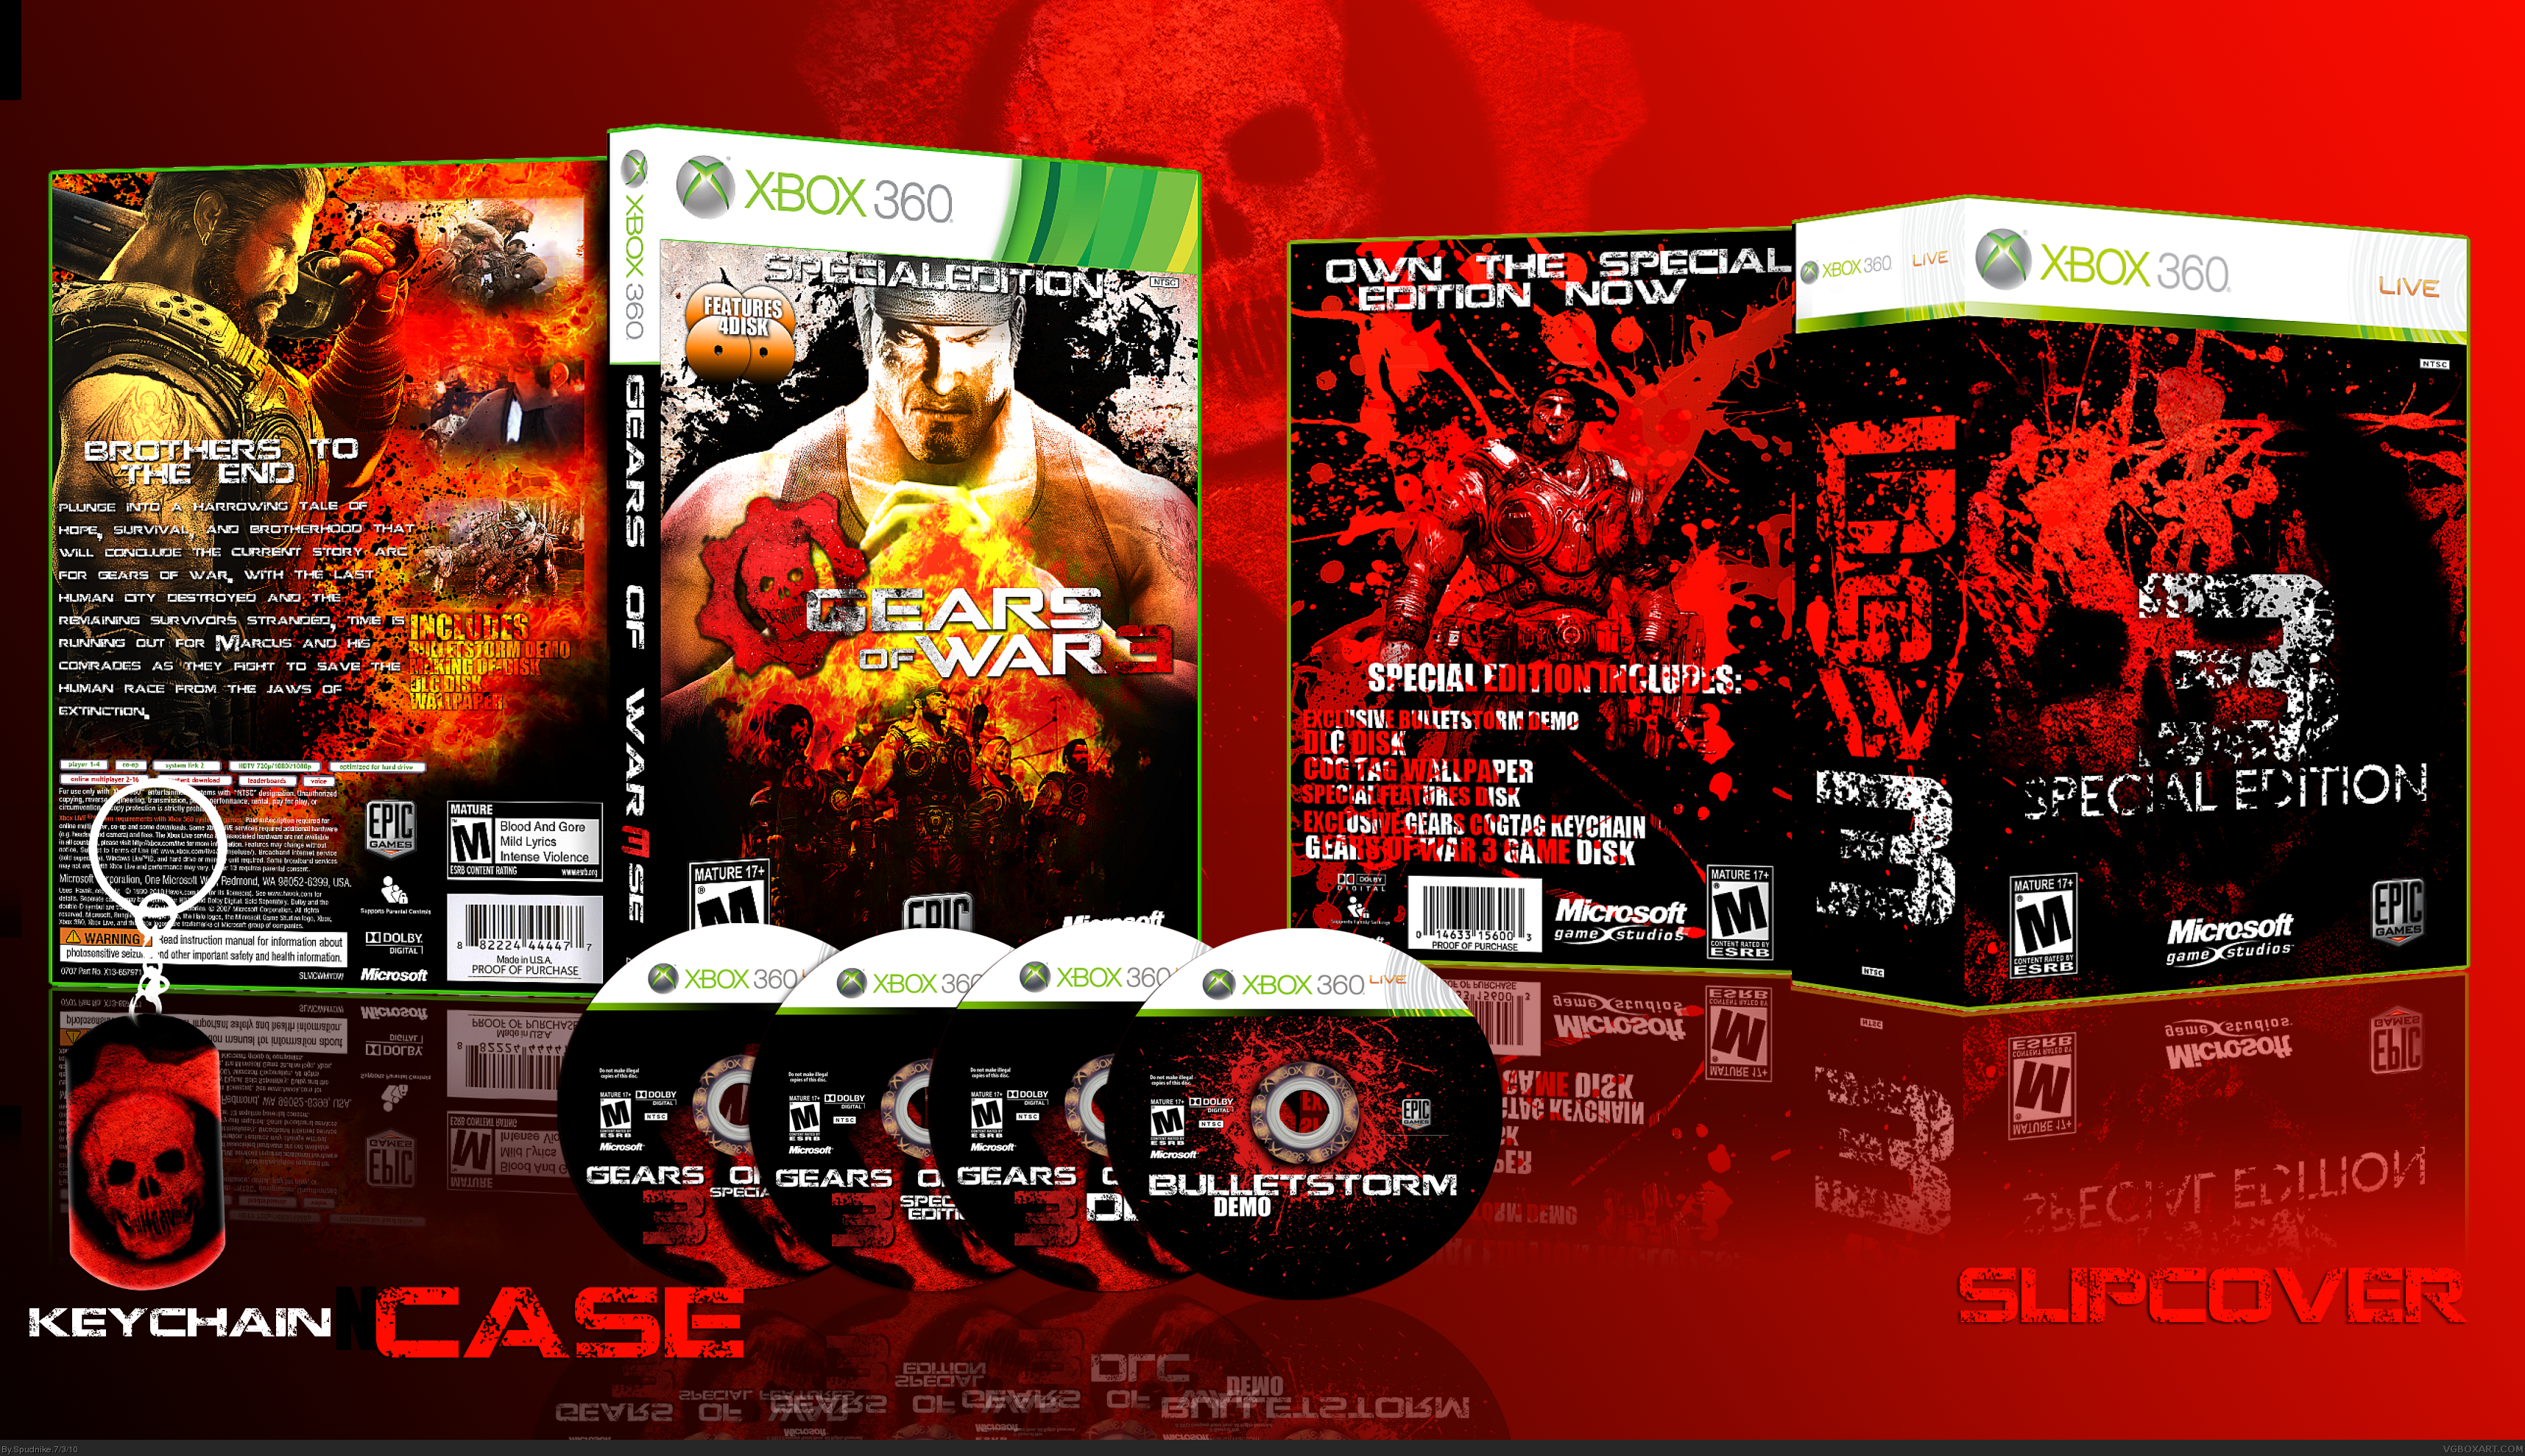 Gears of War 3 Special Edtion box cover